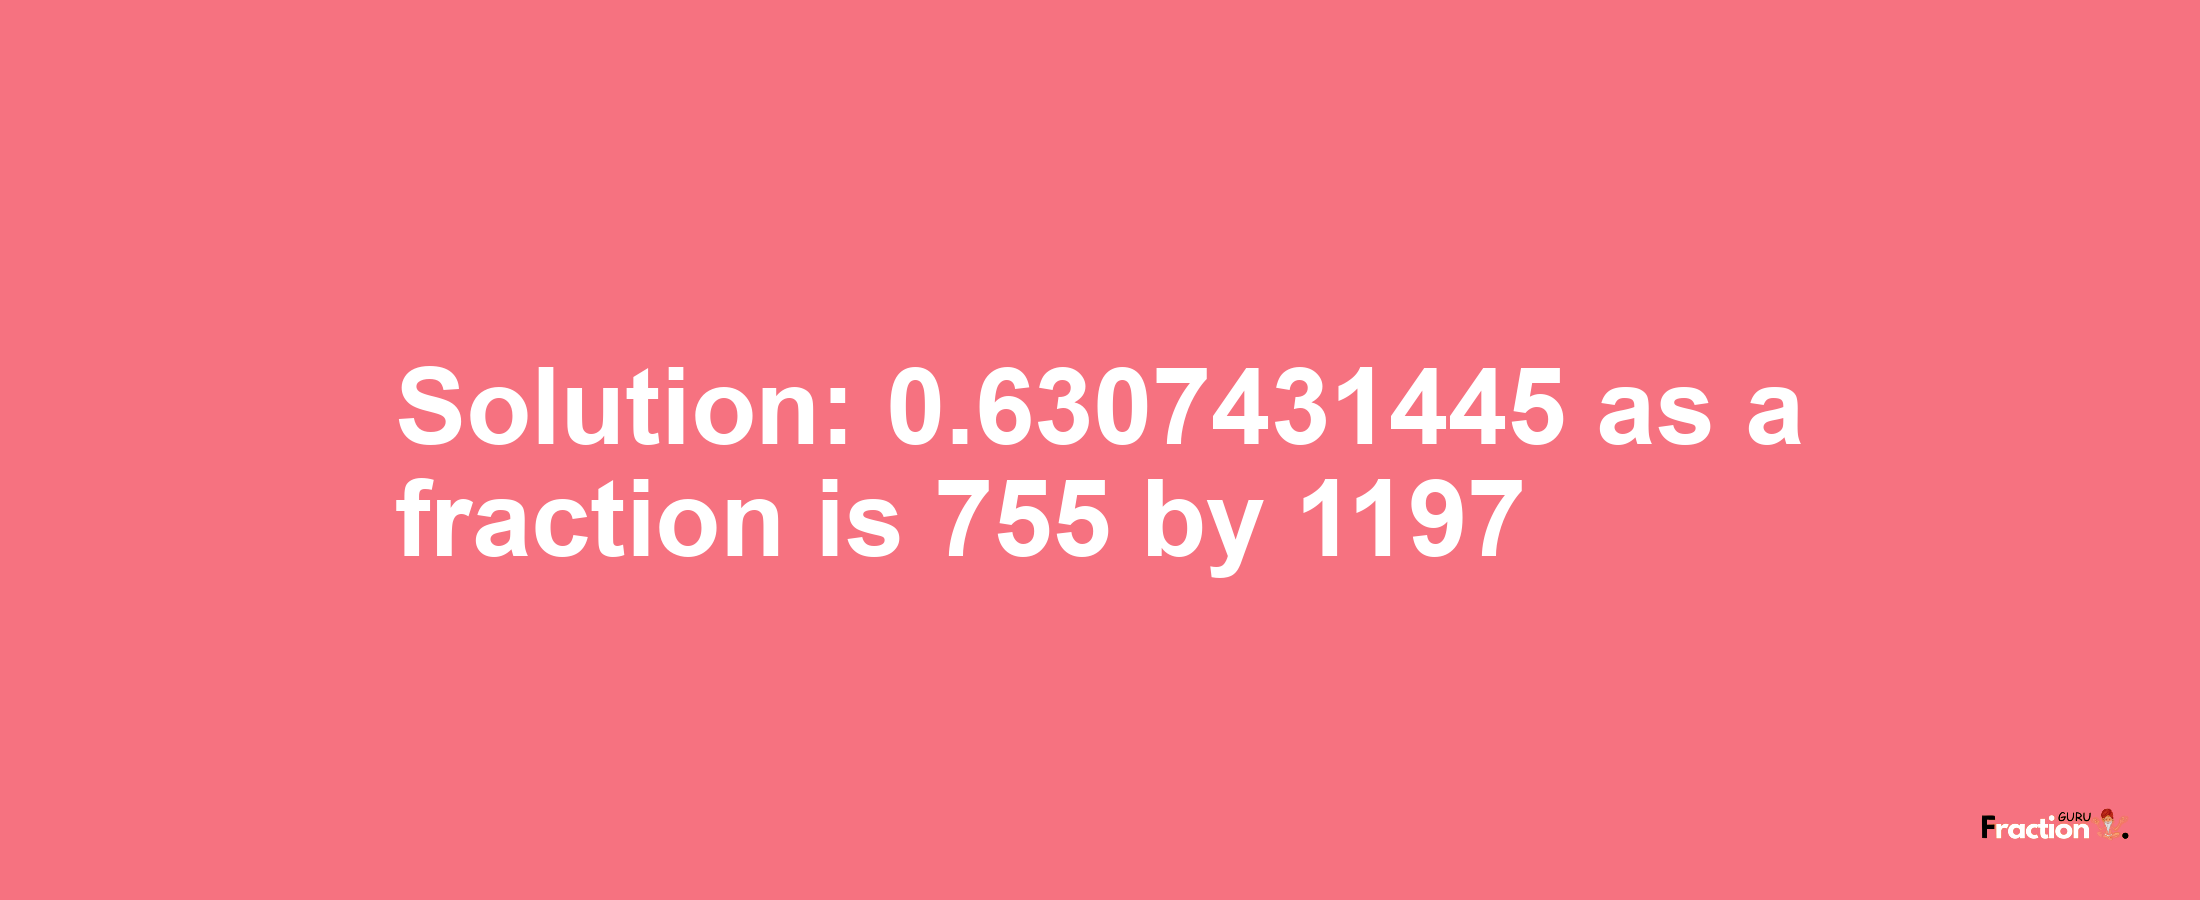 Solution:0.6307431445 as a fraction is 755/1197